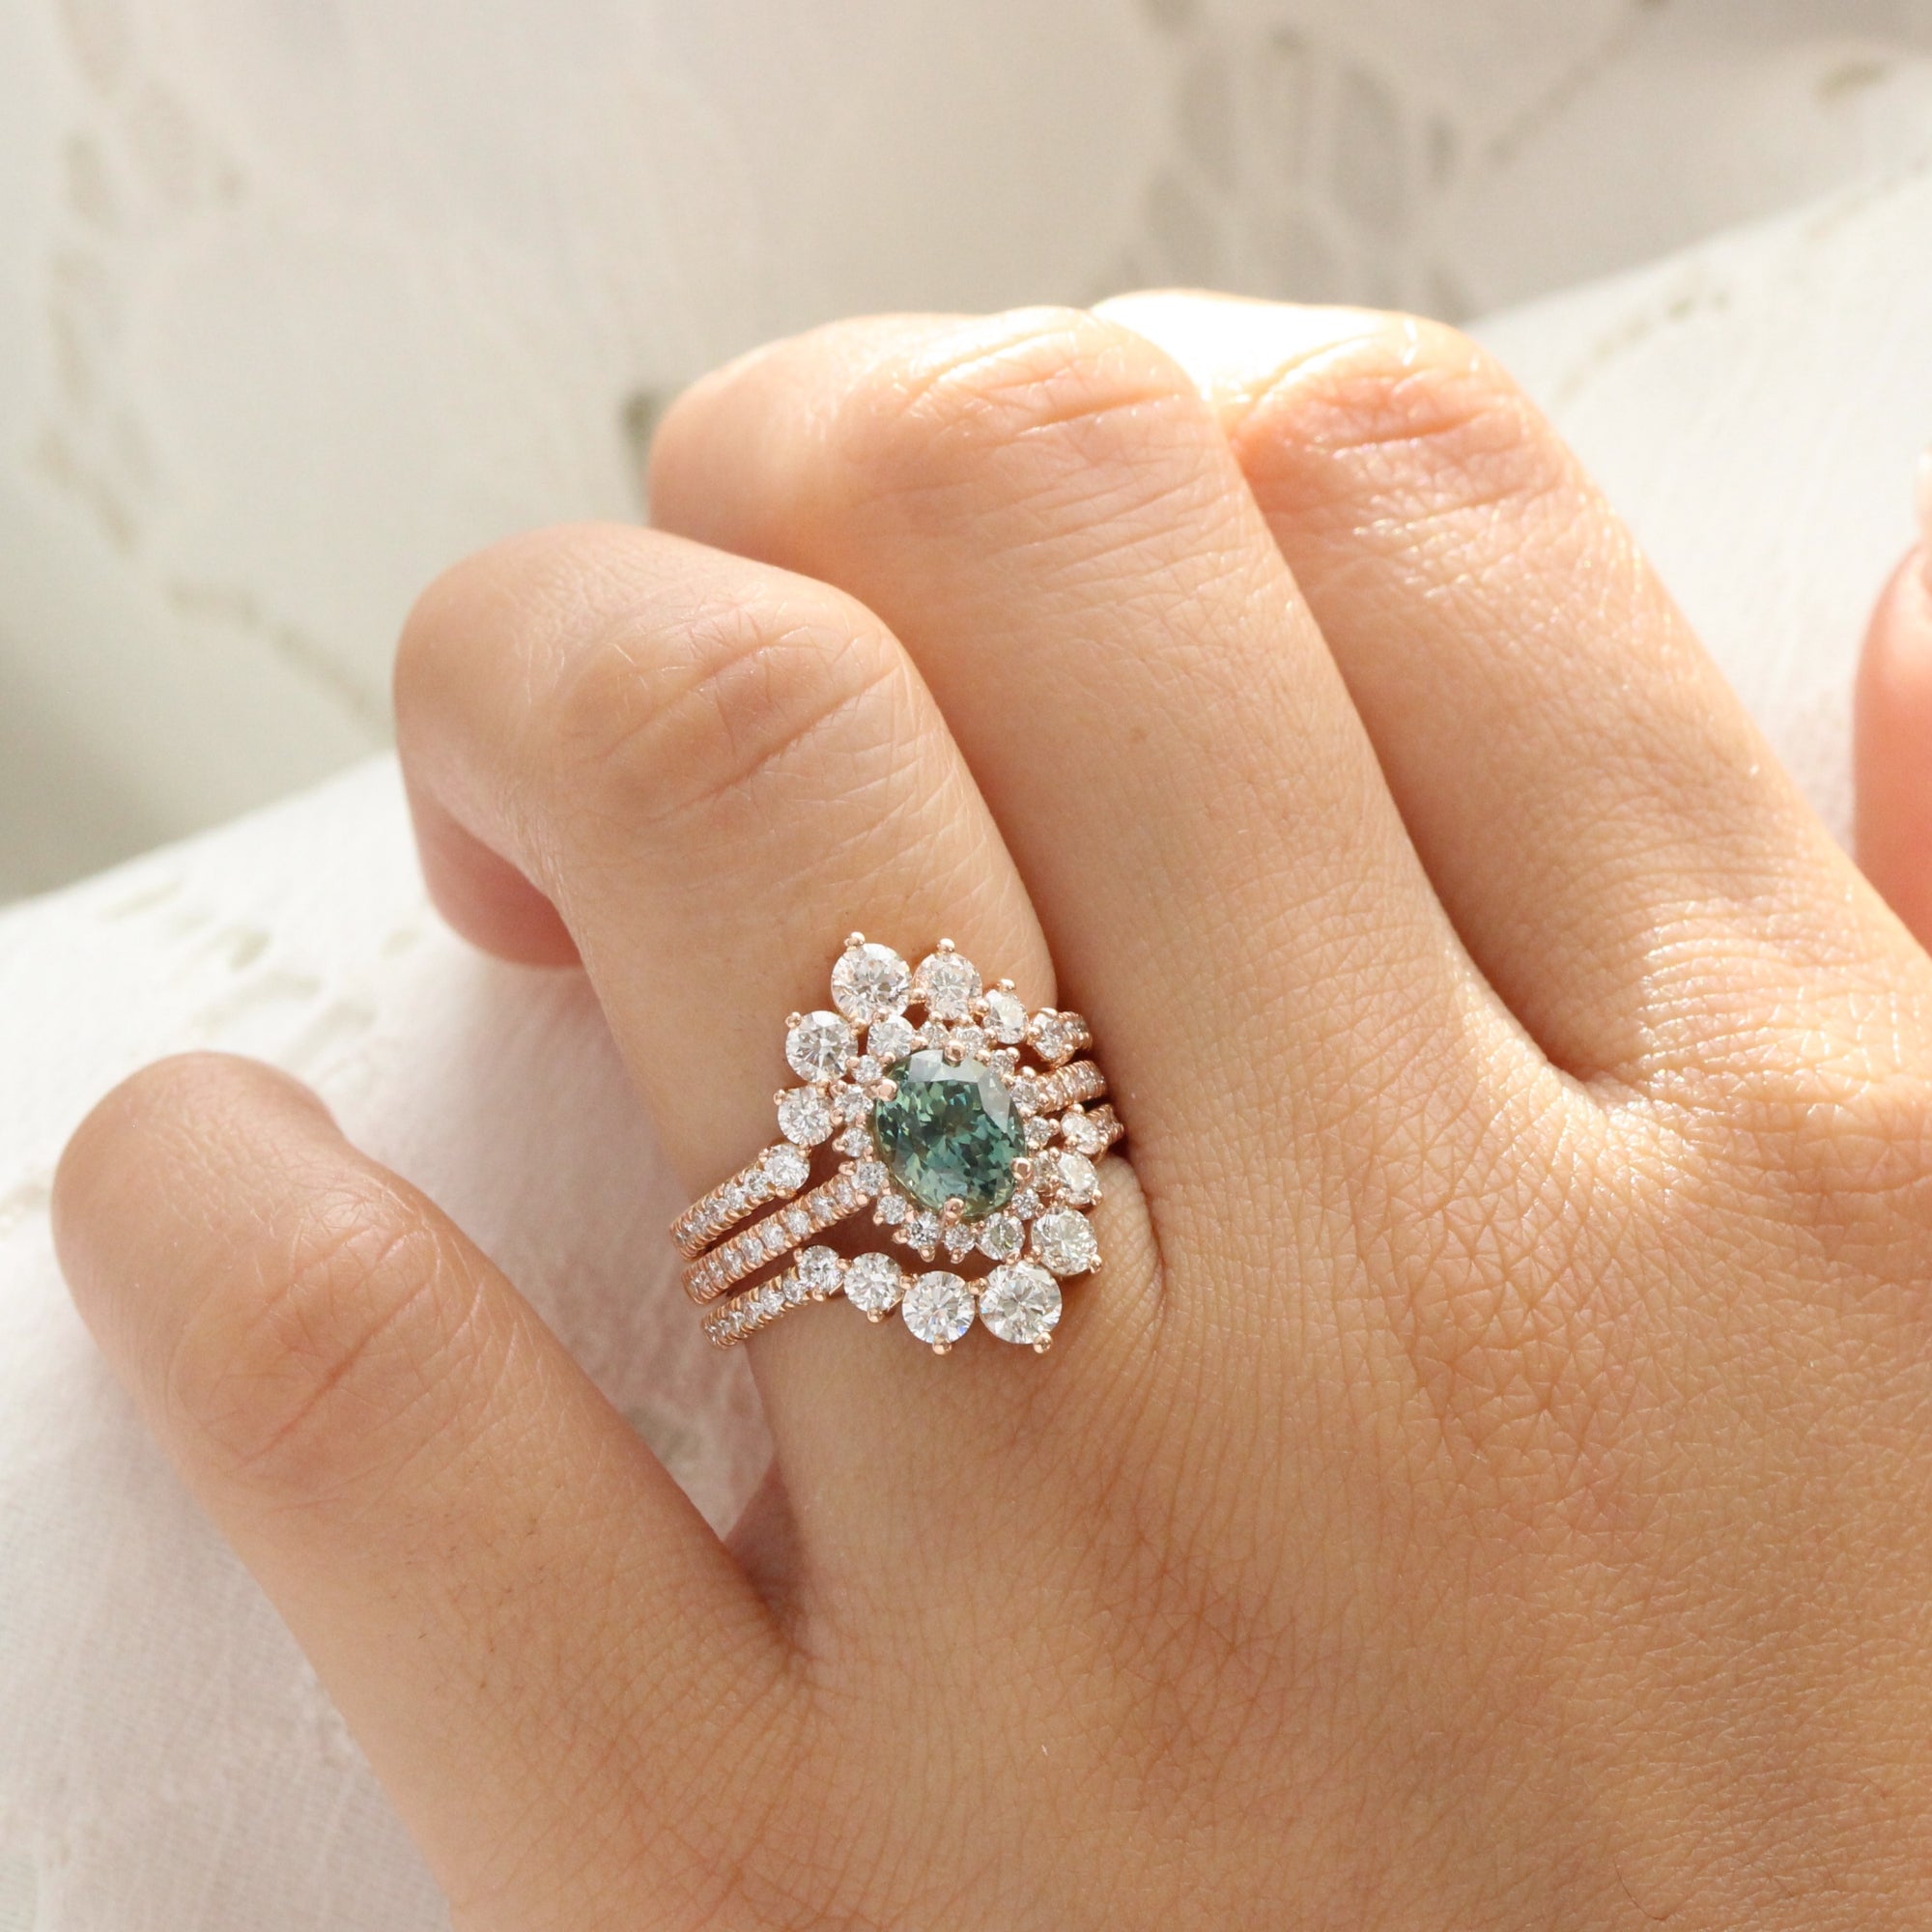 Diversity of Emerald Green Engagement Rings